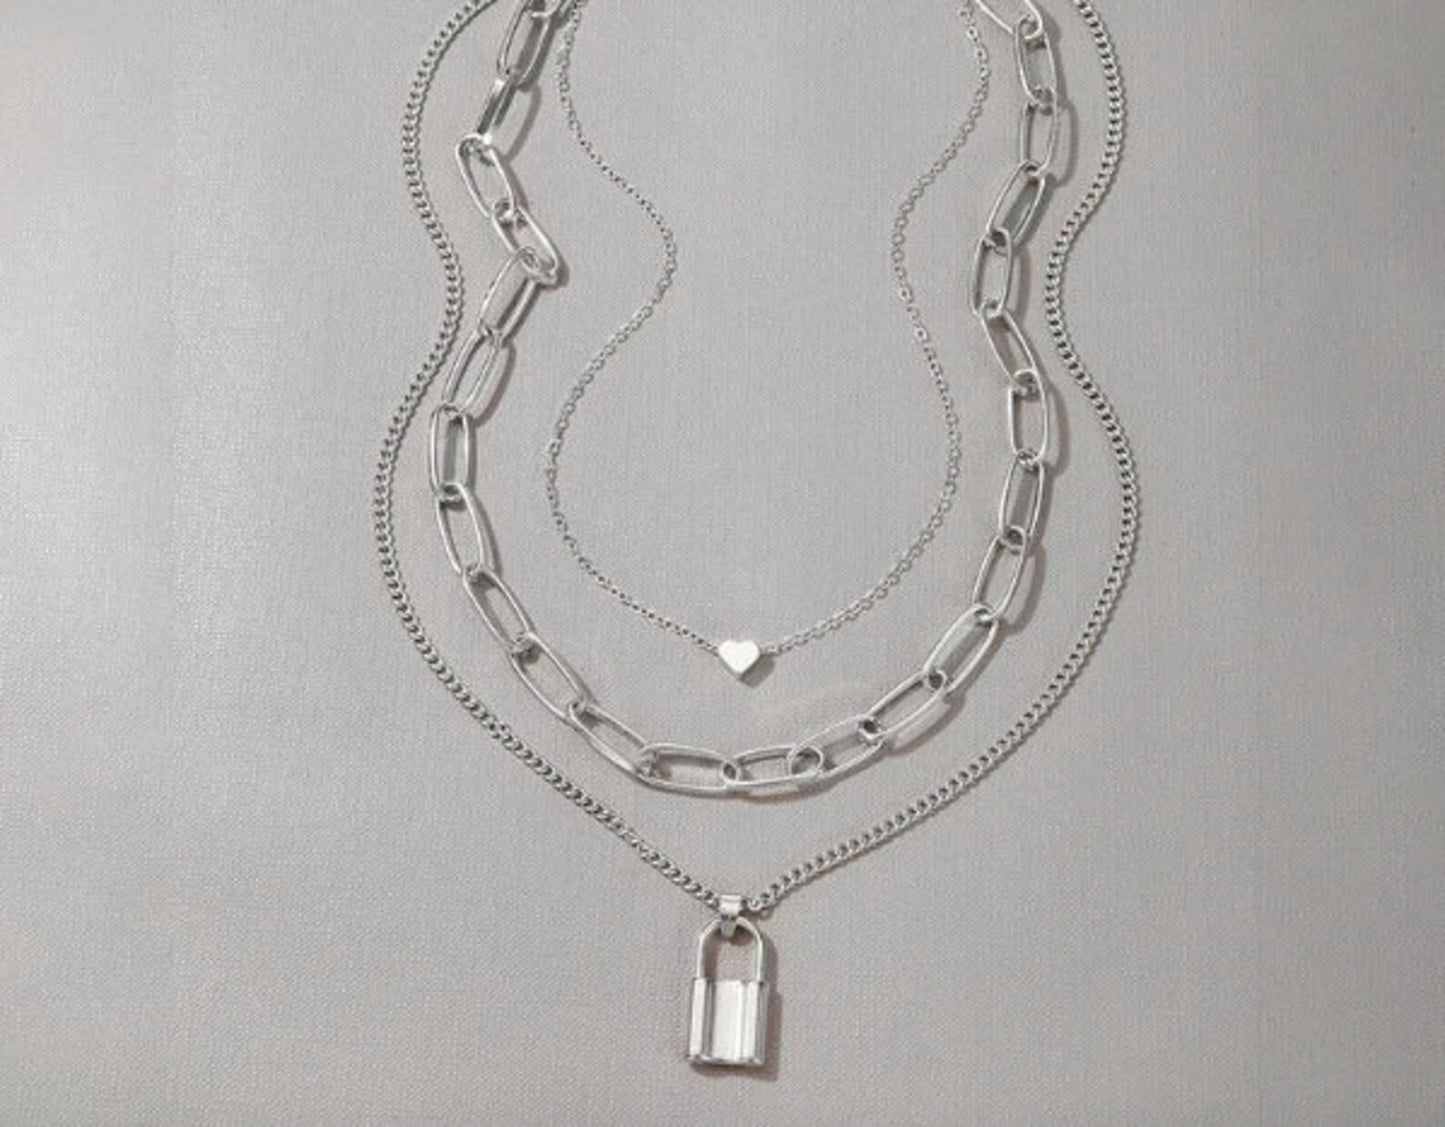 Chain Necklace with Lock Charm